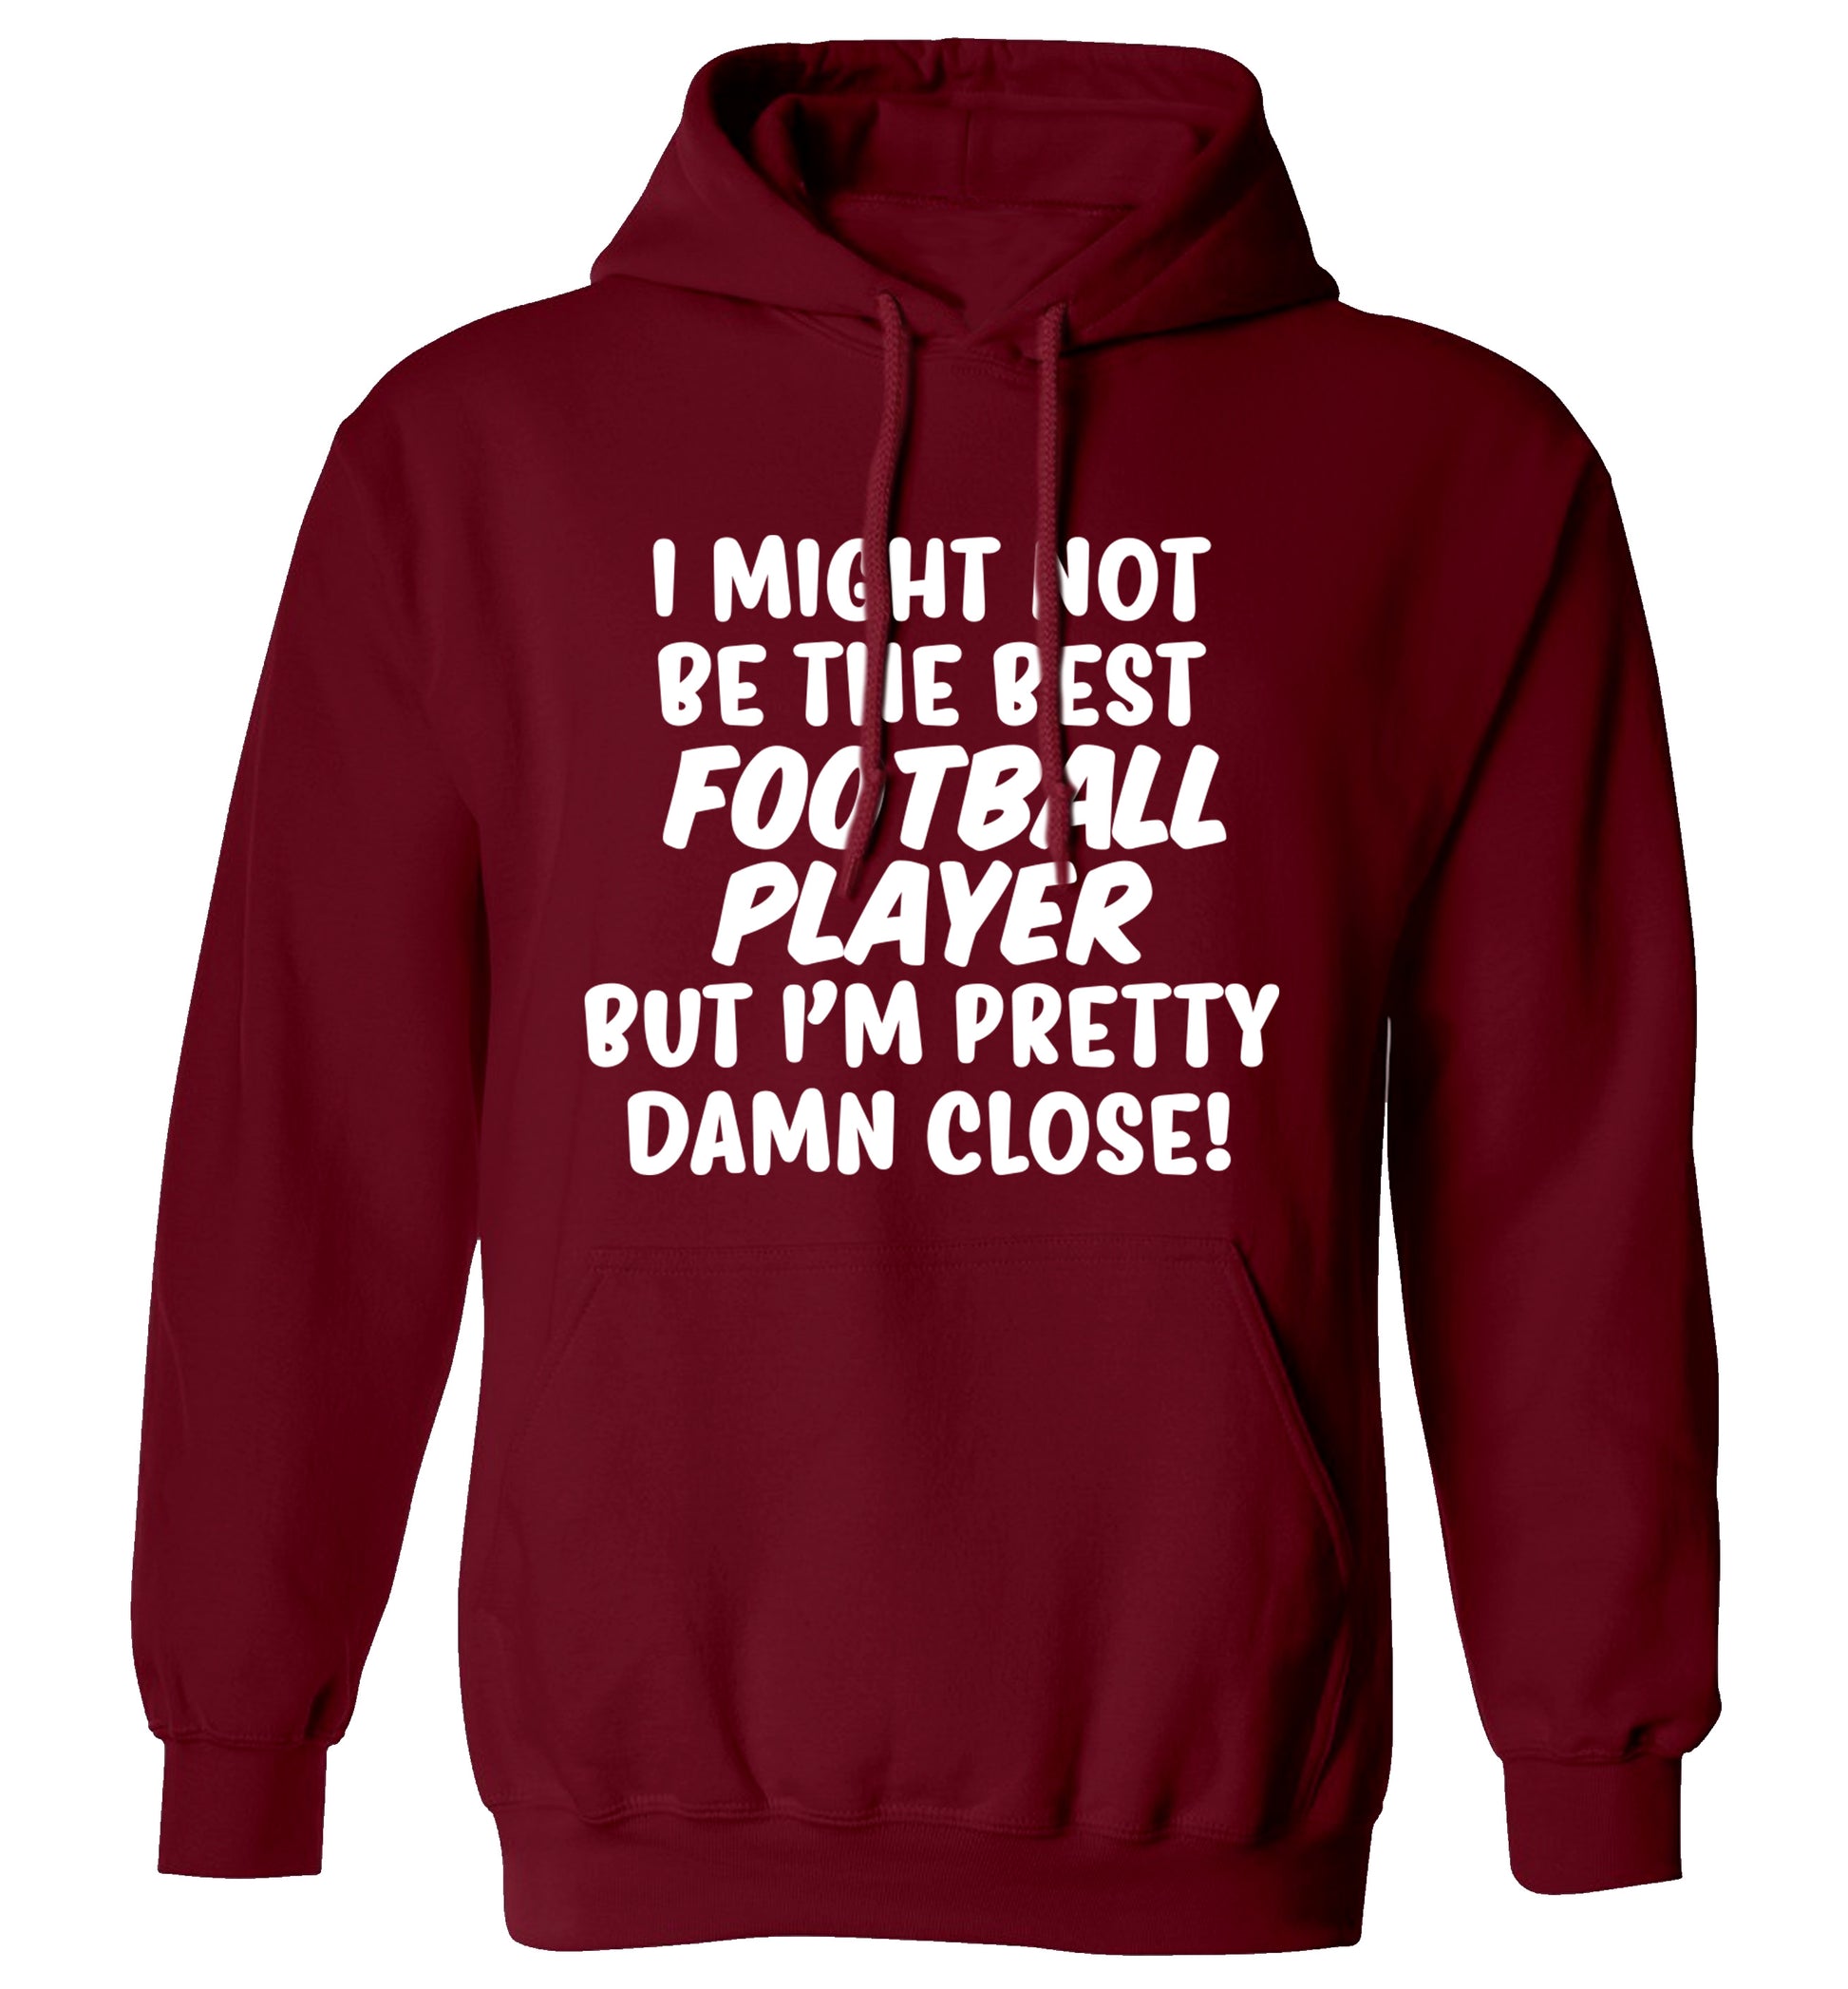 I might not be the best football player but I'm pretty close! adults unisexmaroon hoodie 2XL